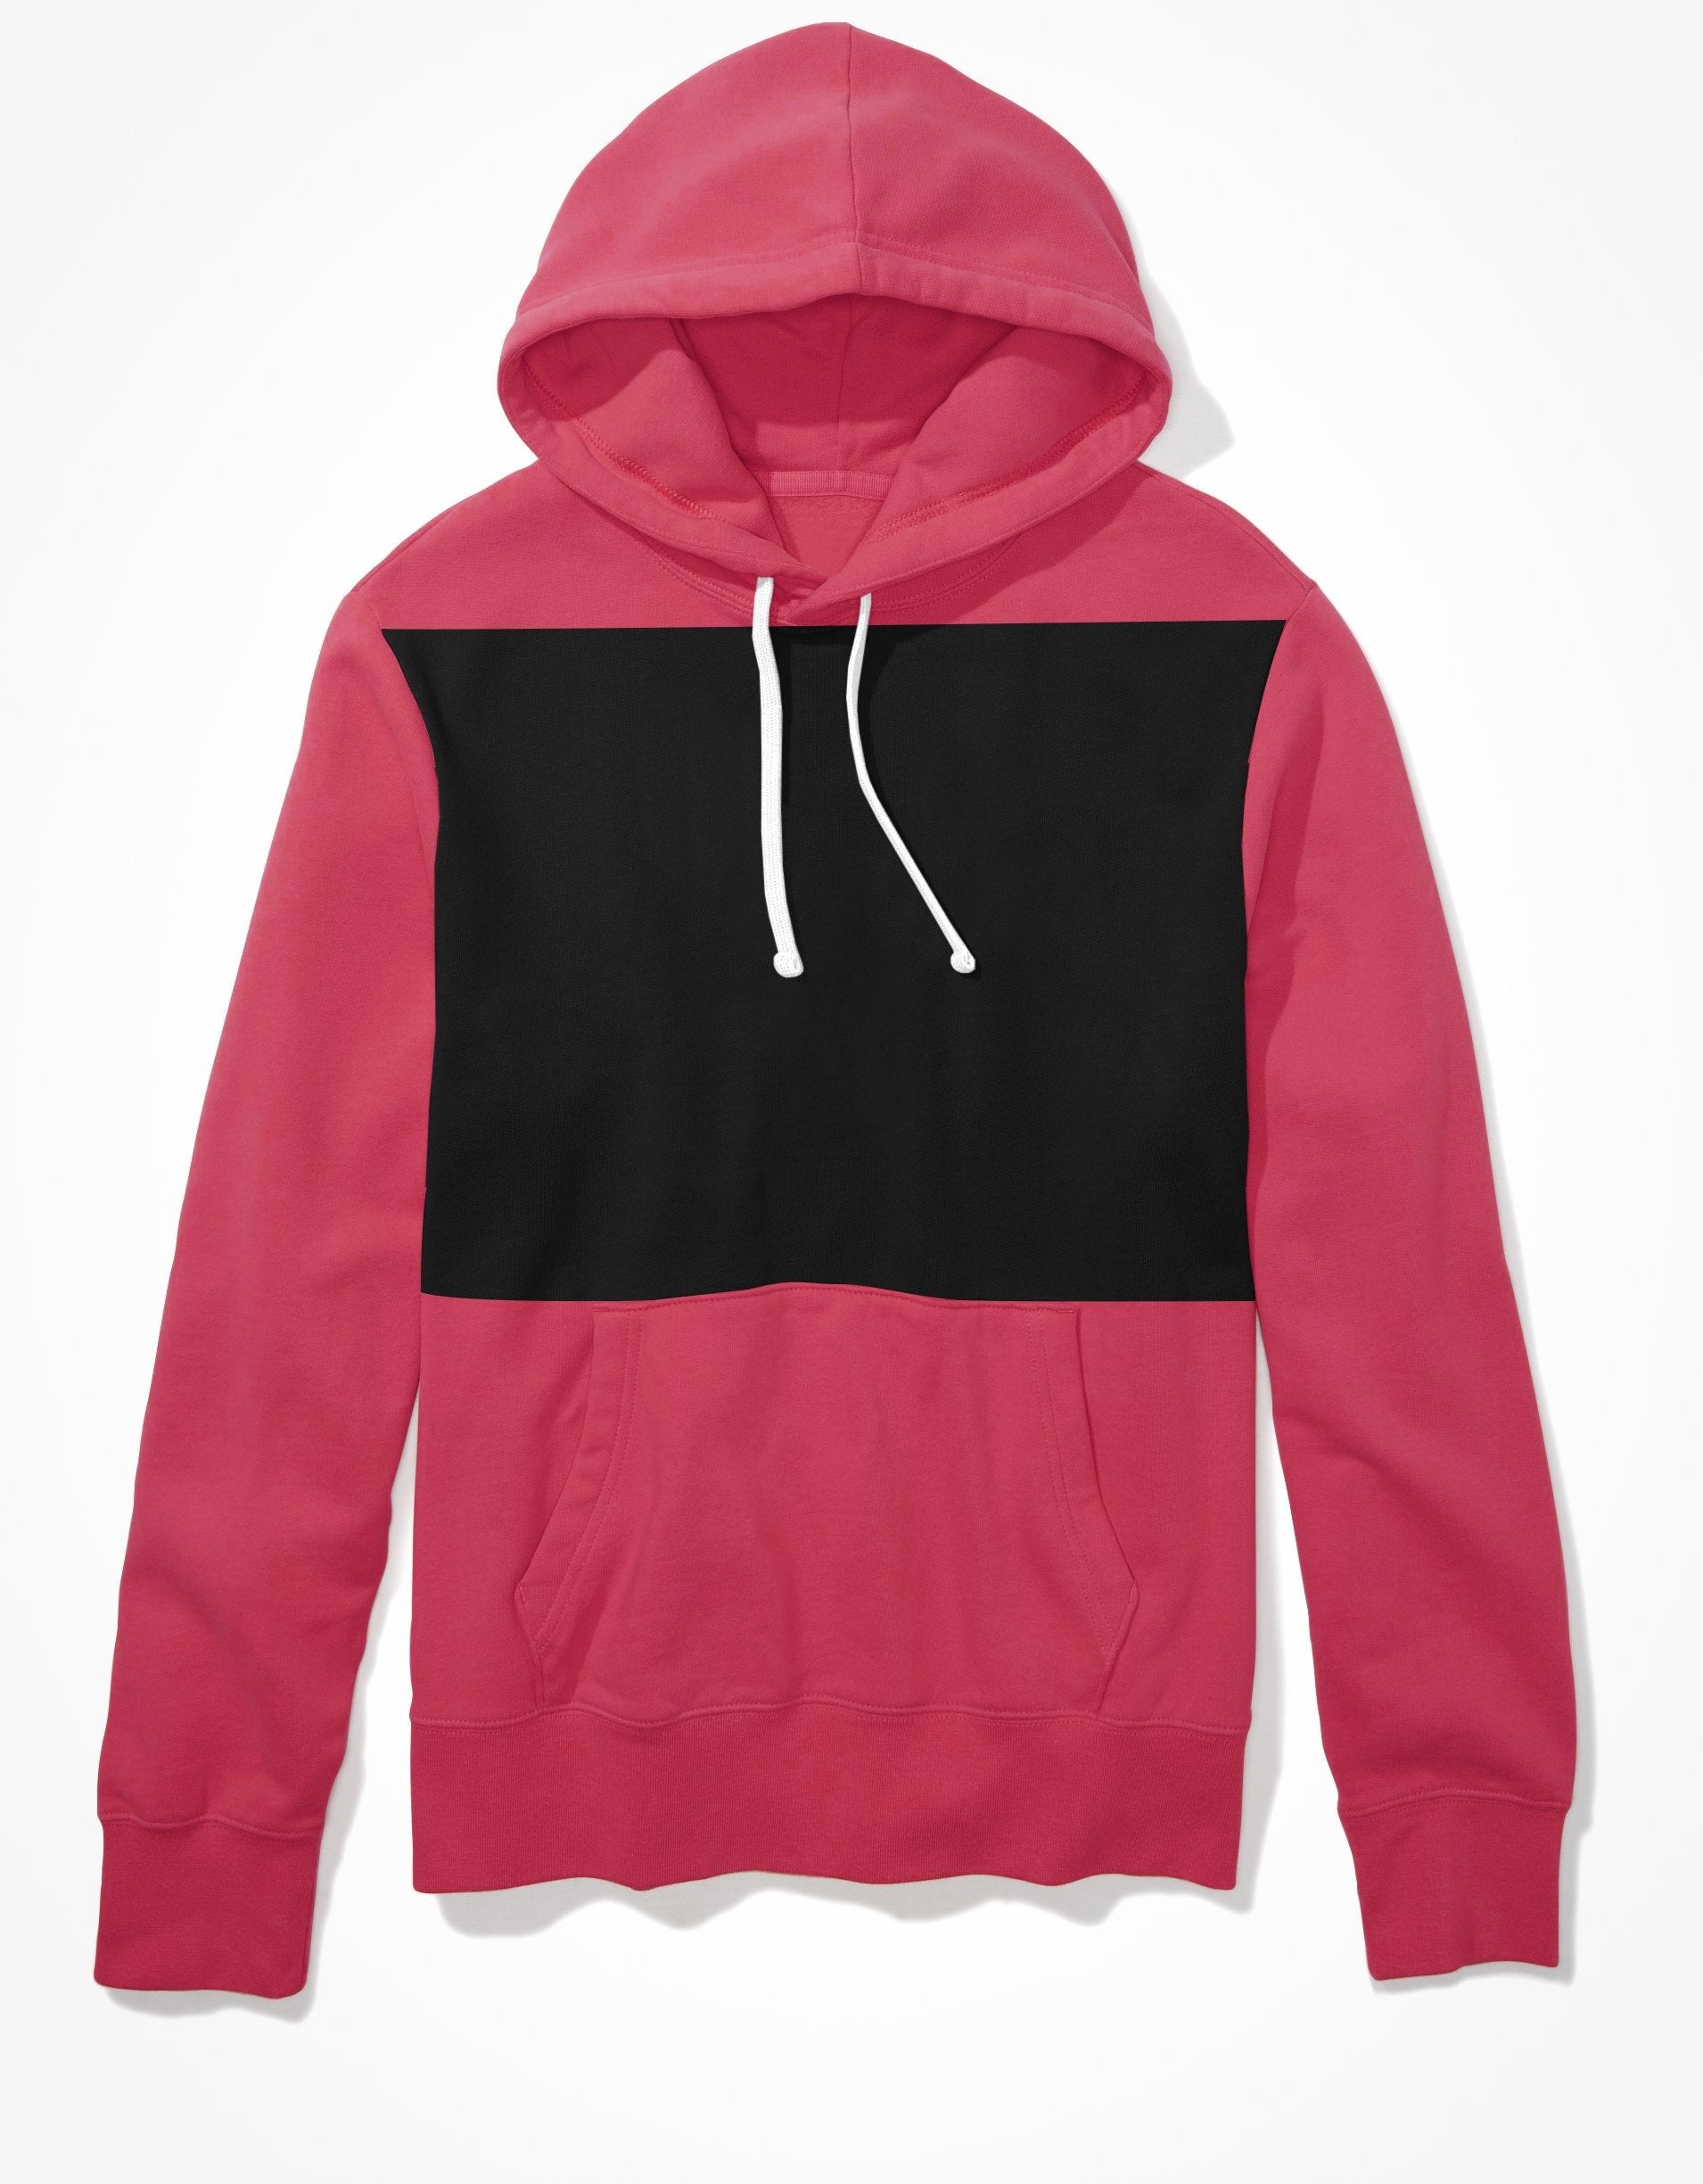 Next Fleece Pullover Hoodie For Men-Pink with Black Panel-BE188